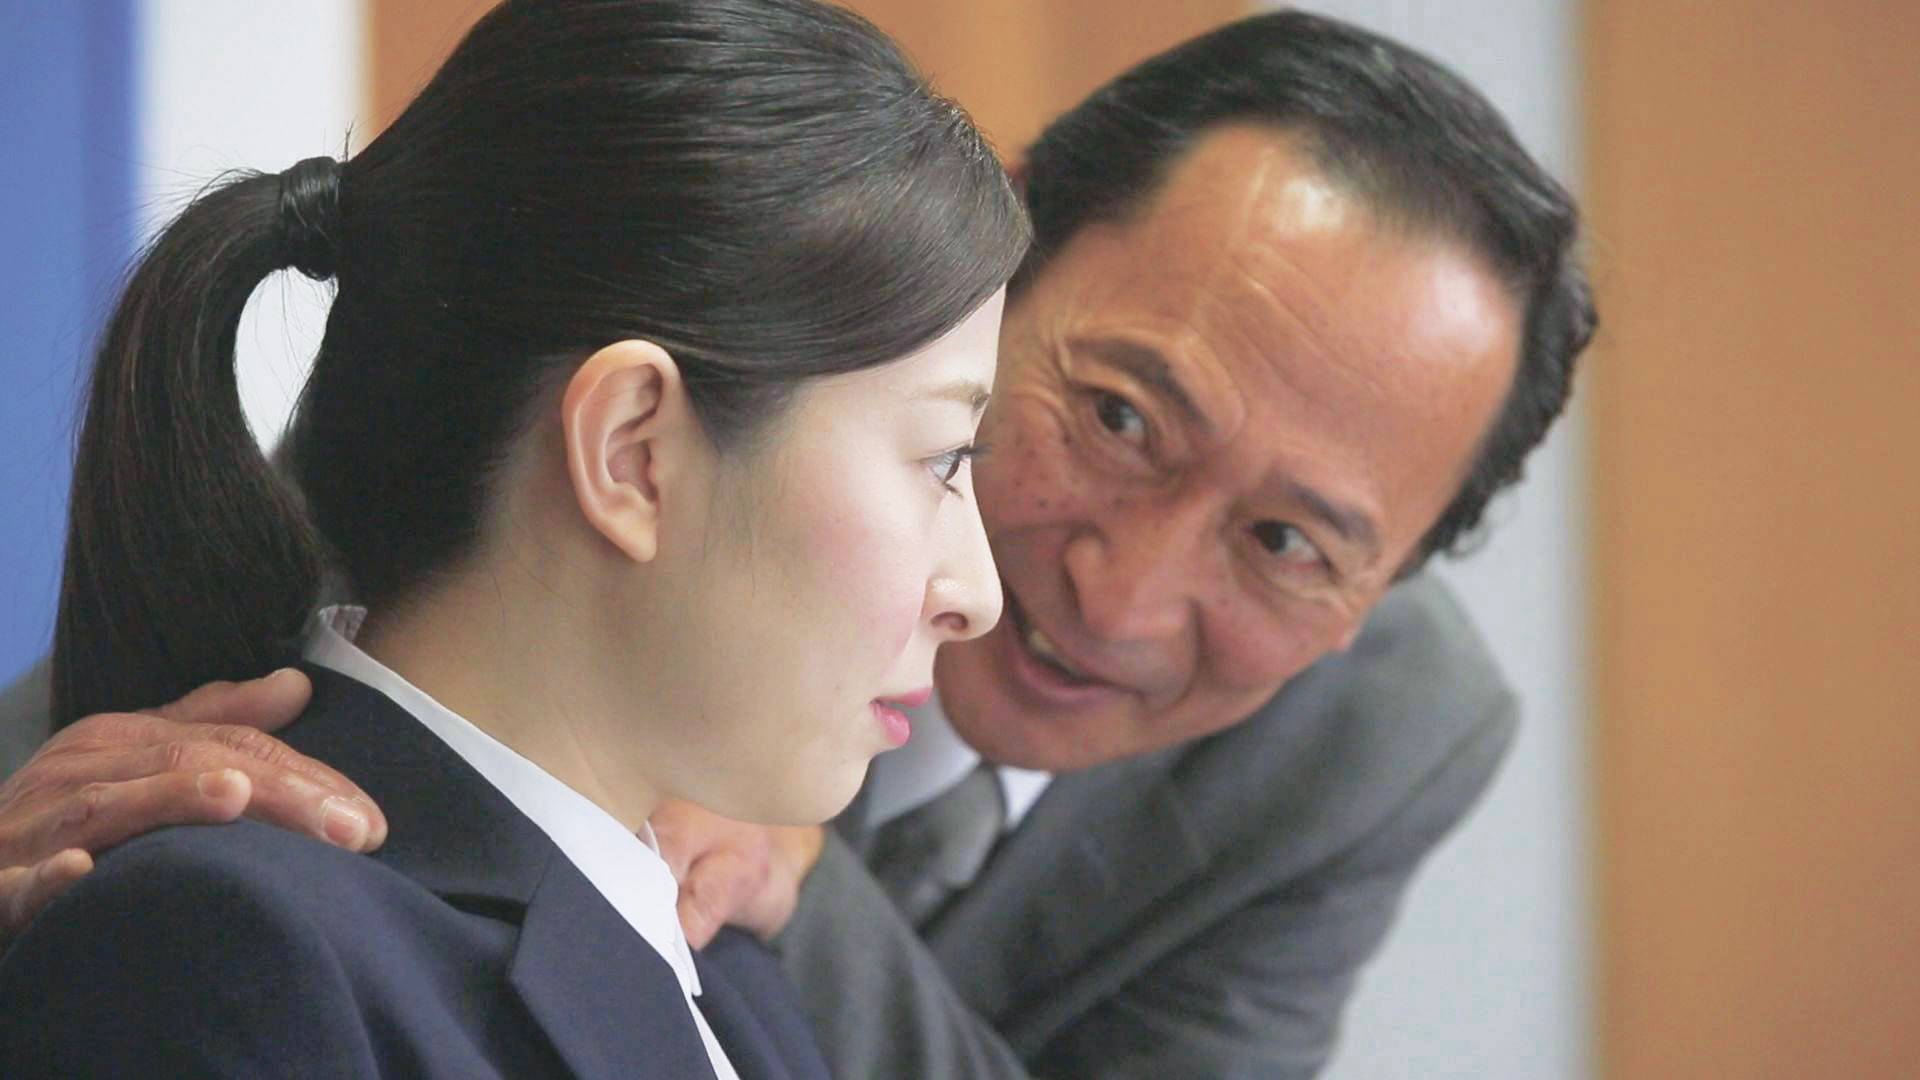 Japans government releases video to help eradicate harassment from politics pic pic